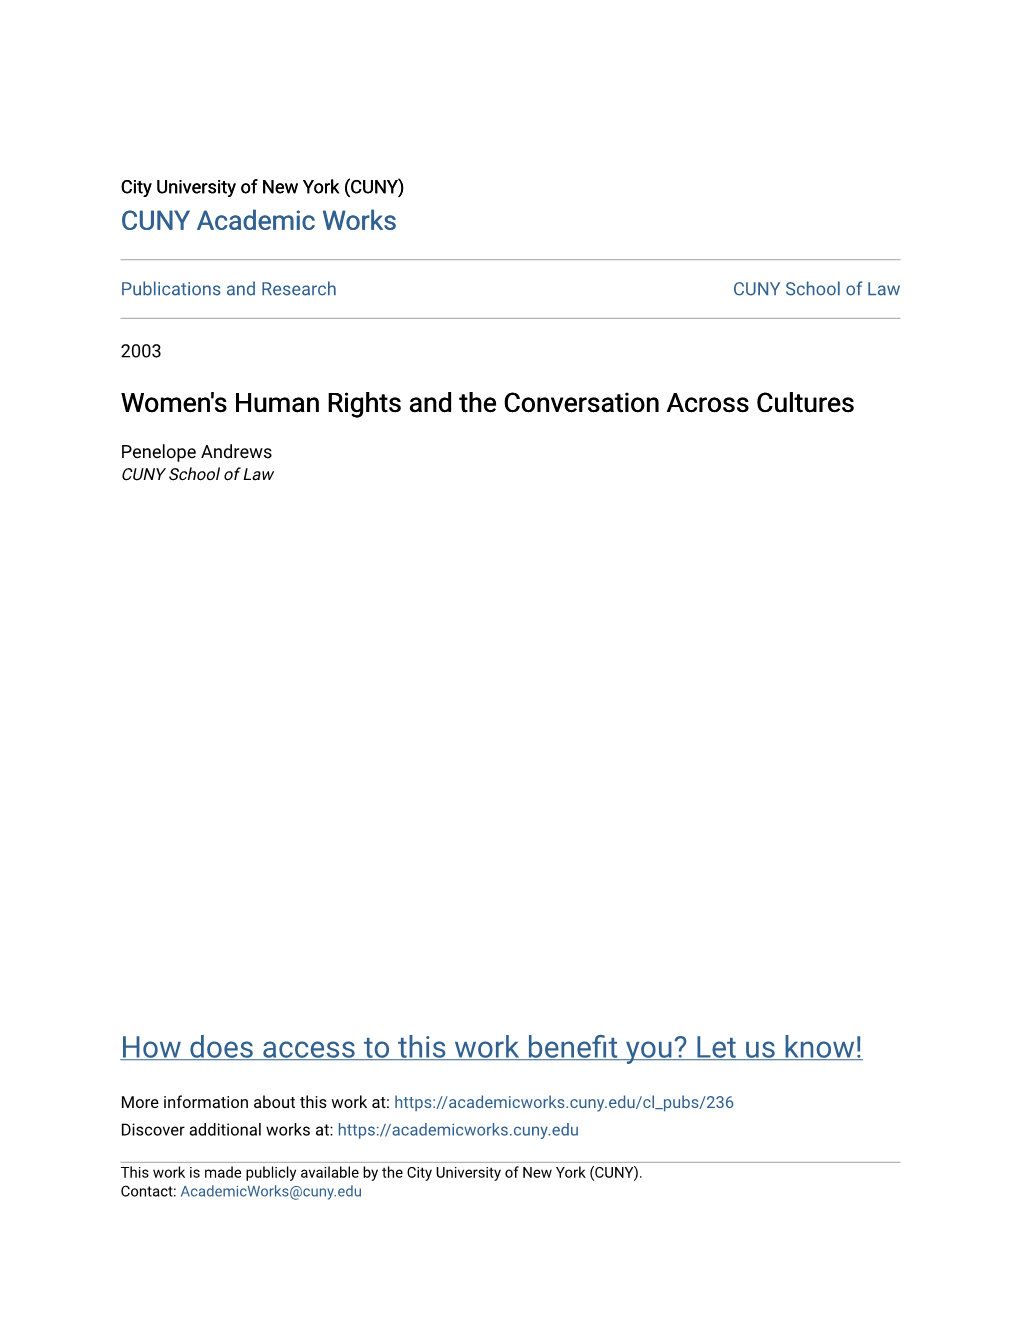 Women's Human Rights and the Conversation Across Cultures